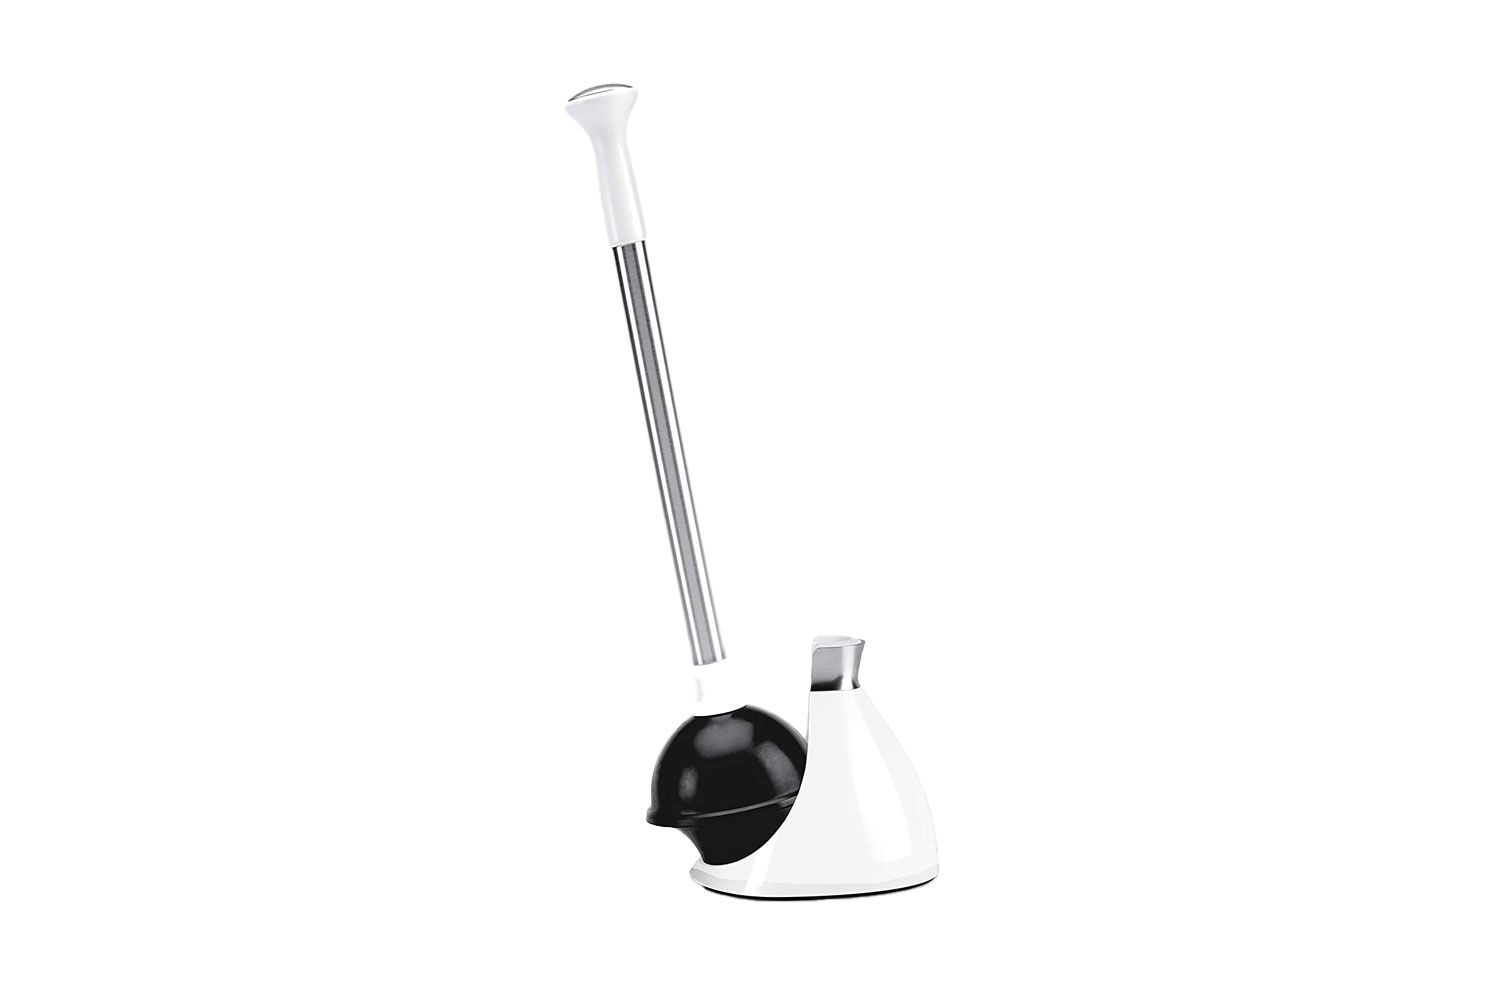 SANGFOR Toilet Plunger with Holder,Upgraded Long Handle Plungers